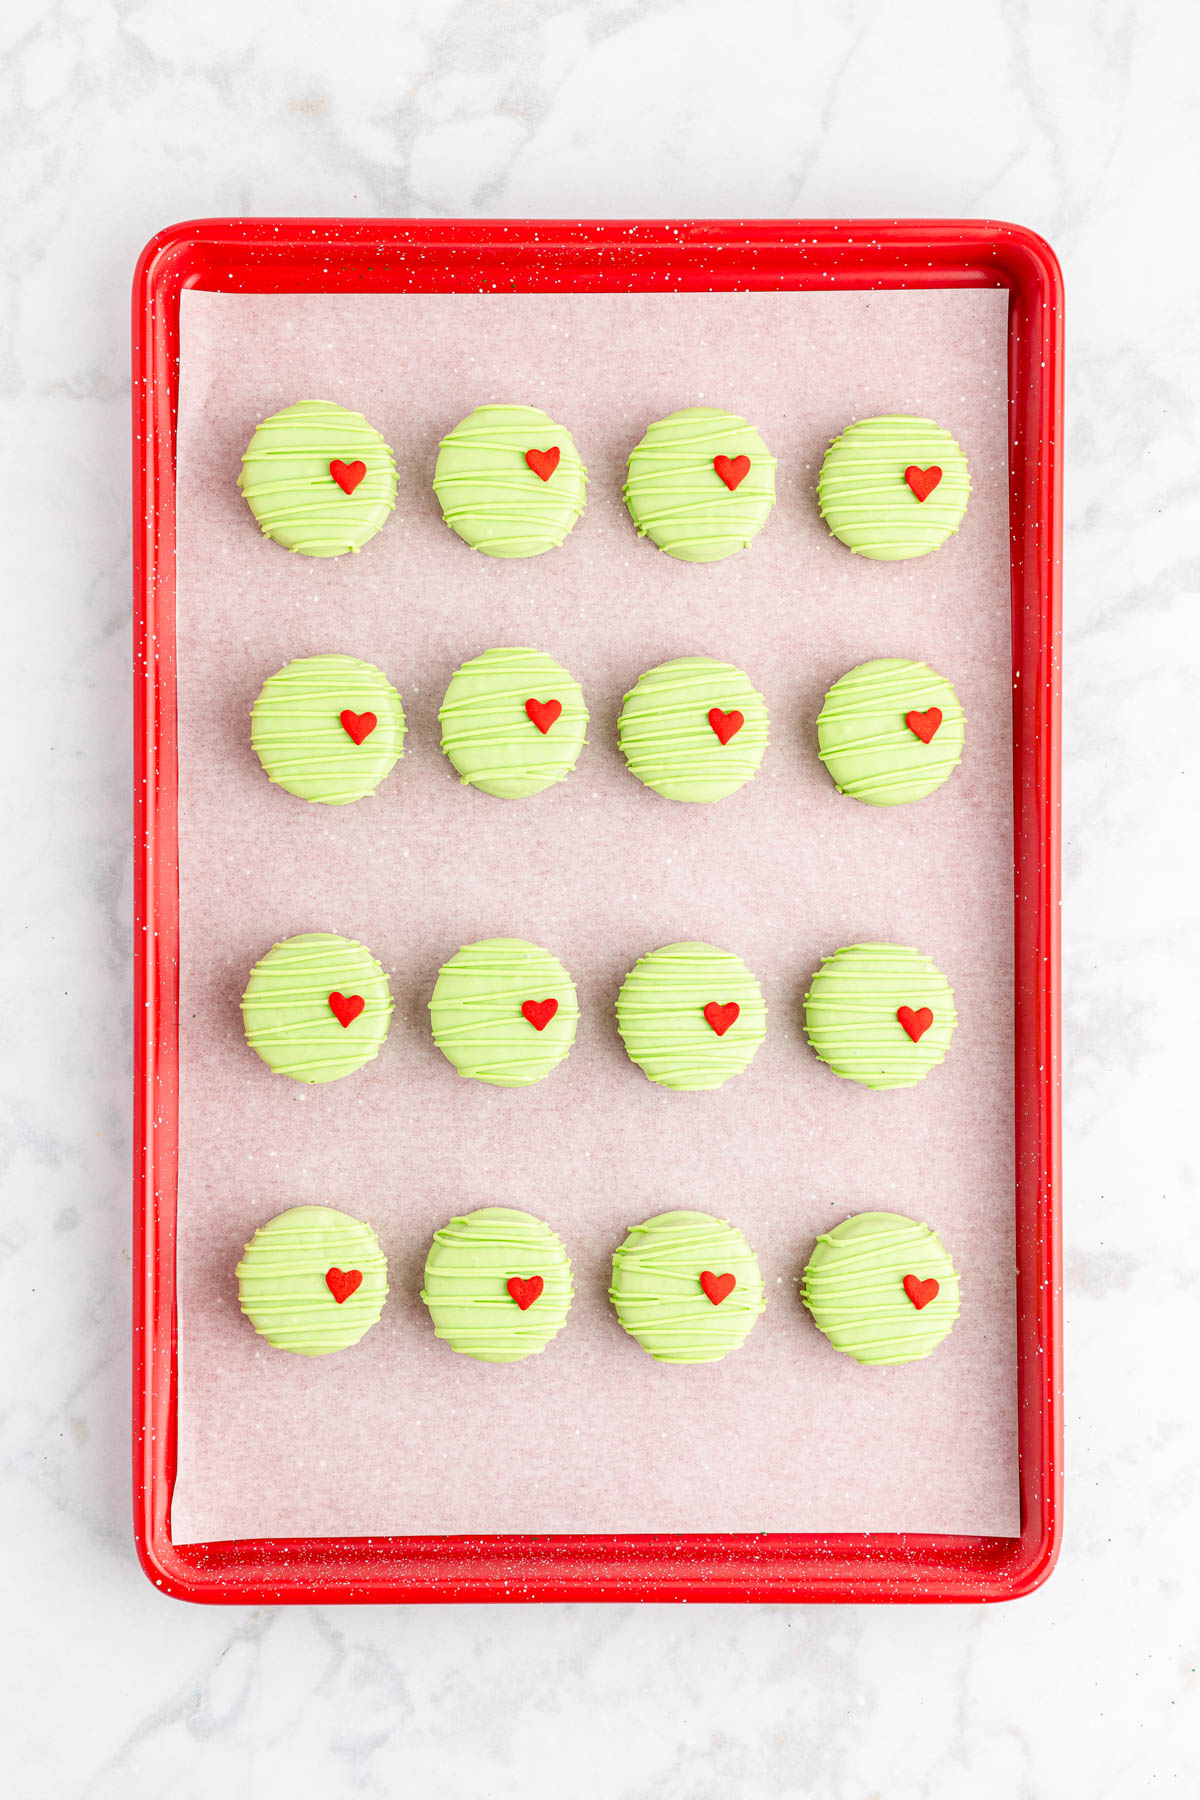 A tray of green cookies with heart shapes on a marble countertop.